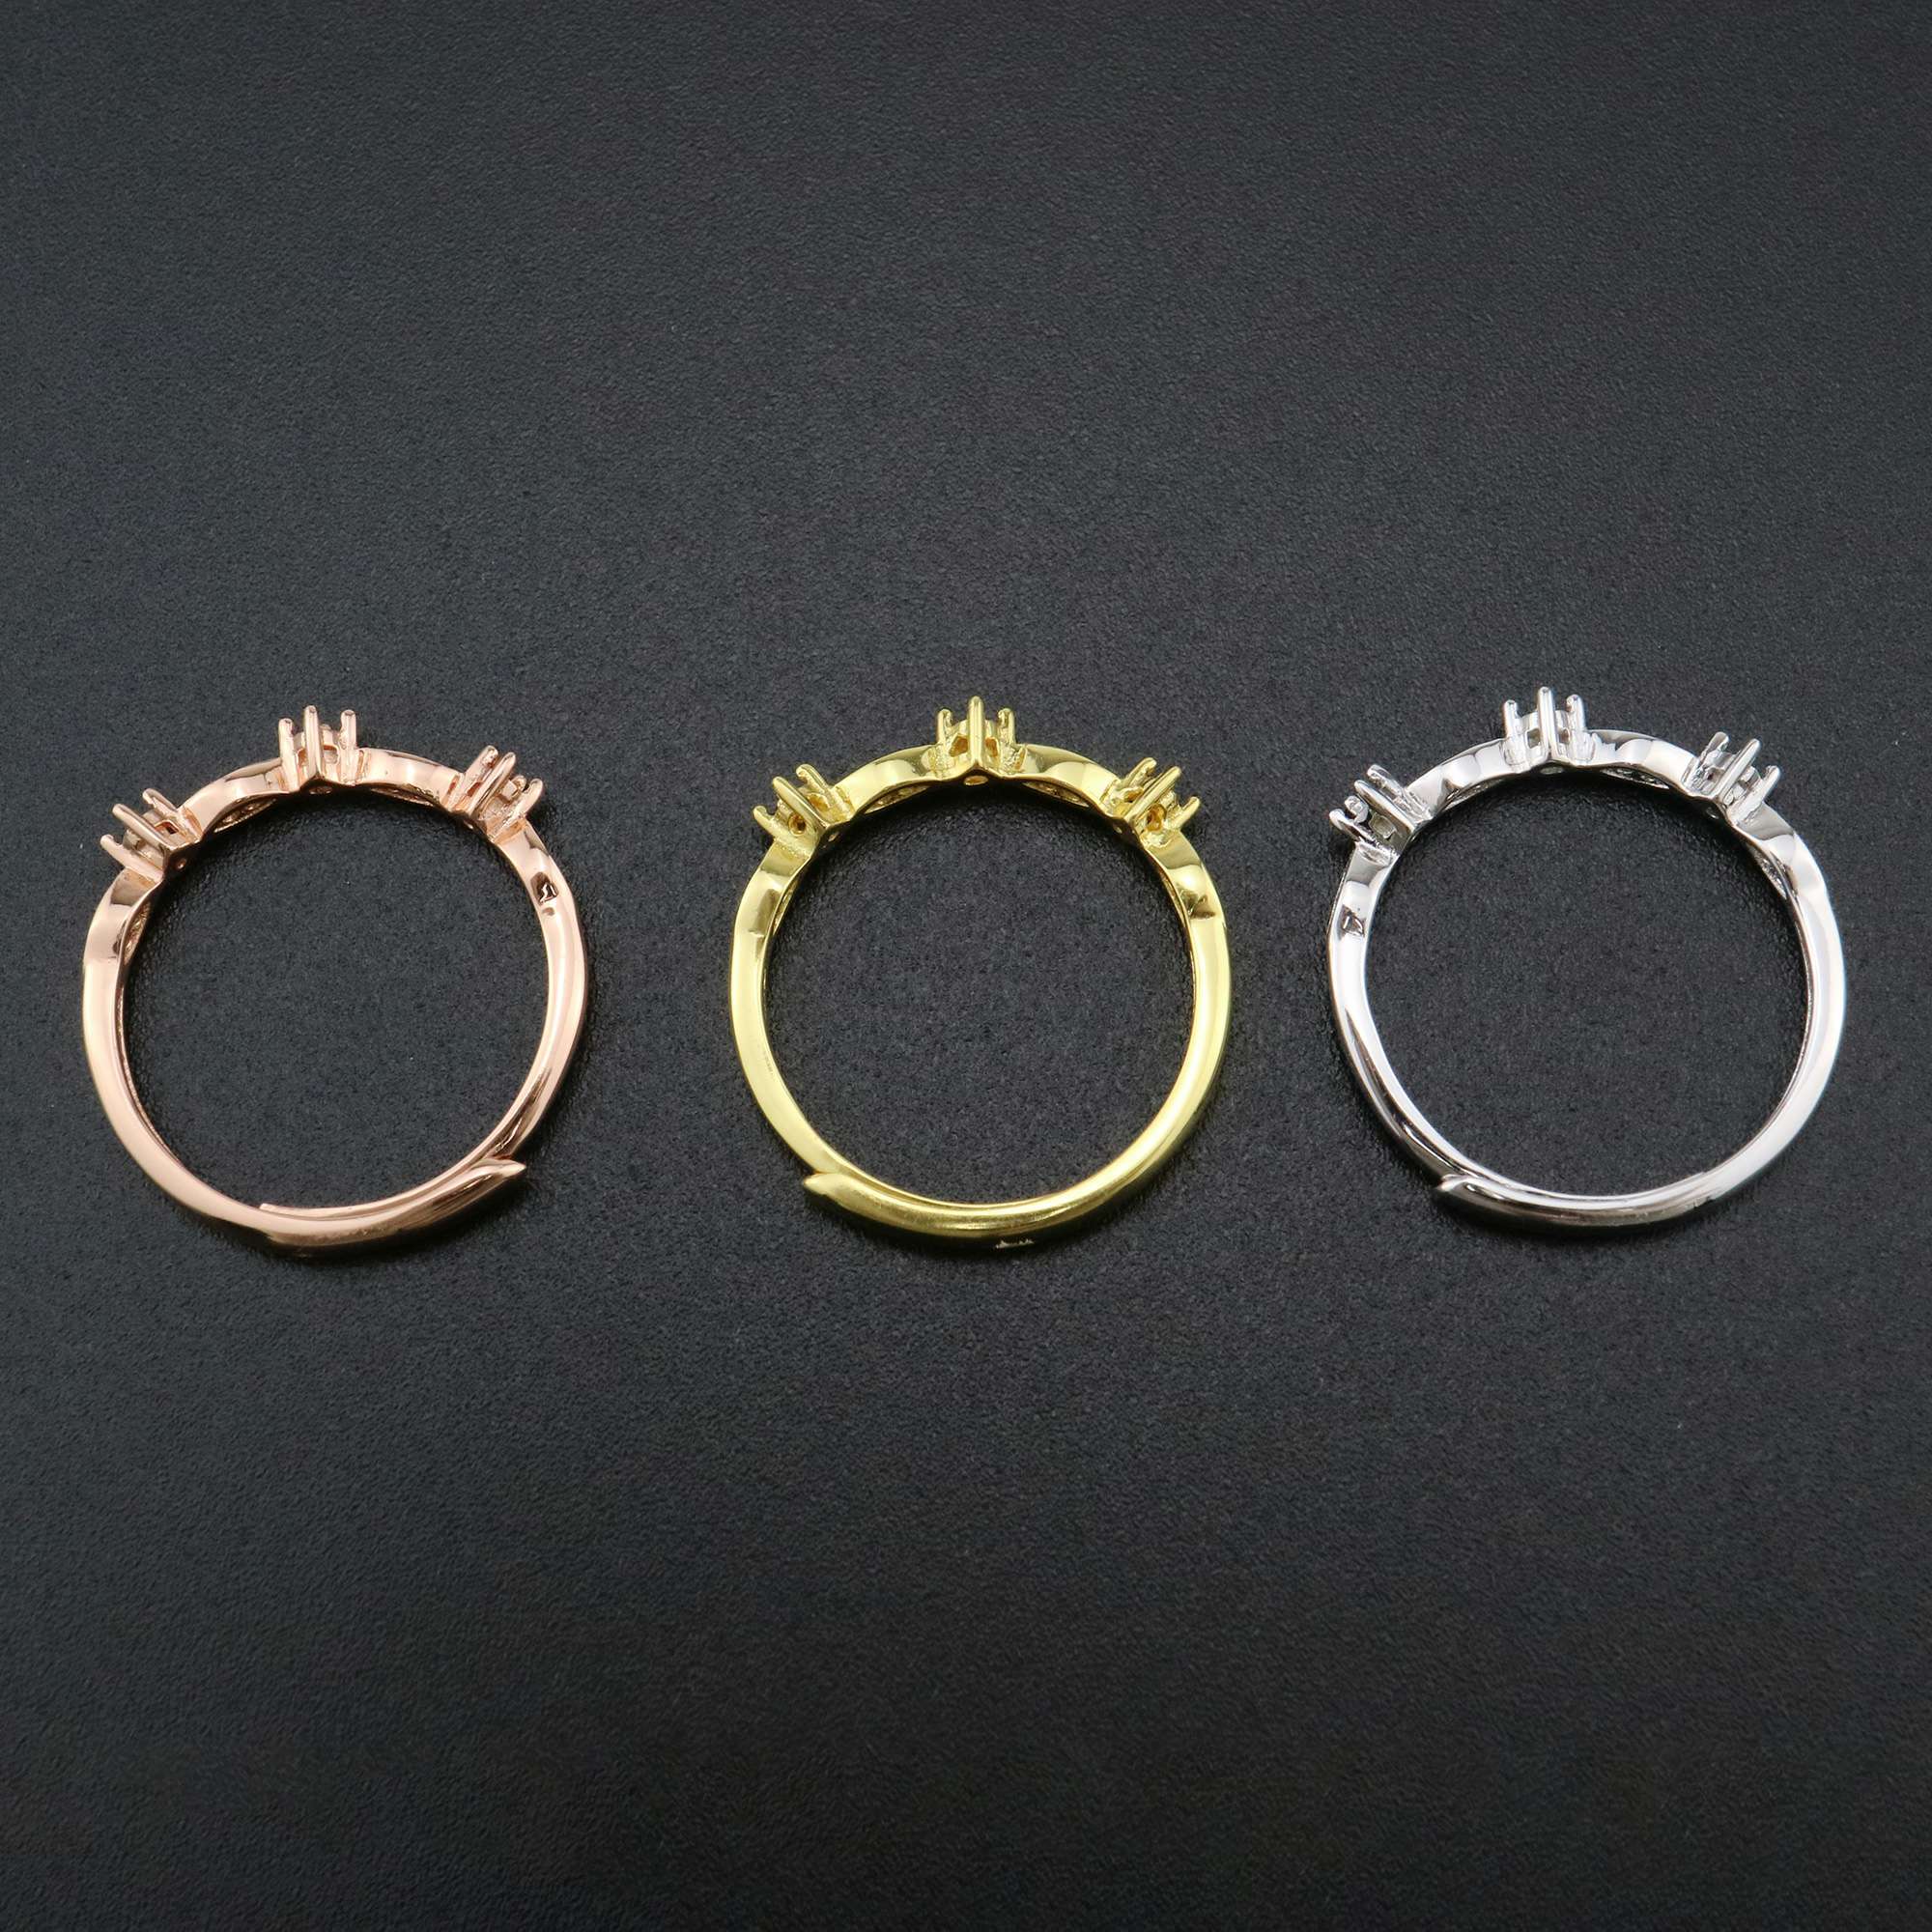 1Pcs 2MM Round Bezel 3 Stones Vintage Style Rose Gold Plated Solid 925 Sterling Silver Adjustable Prong Ring Settings Blank for Gemstone 1210071 - Click Image to Close